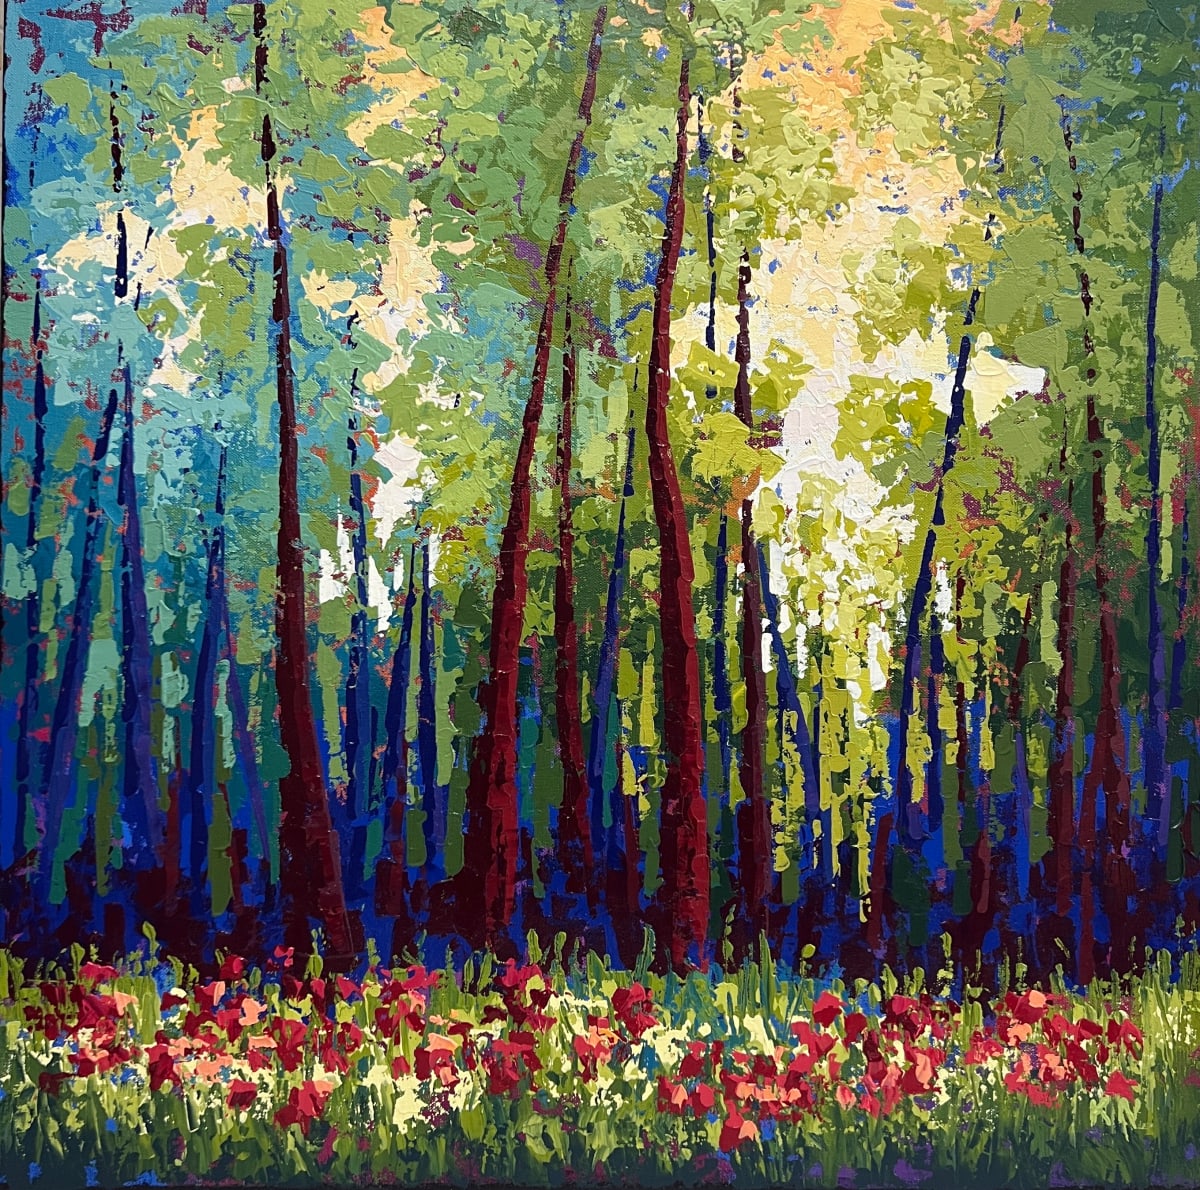 Poppies by the Woods by Karin Neuvirth 